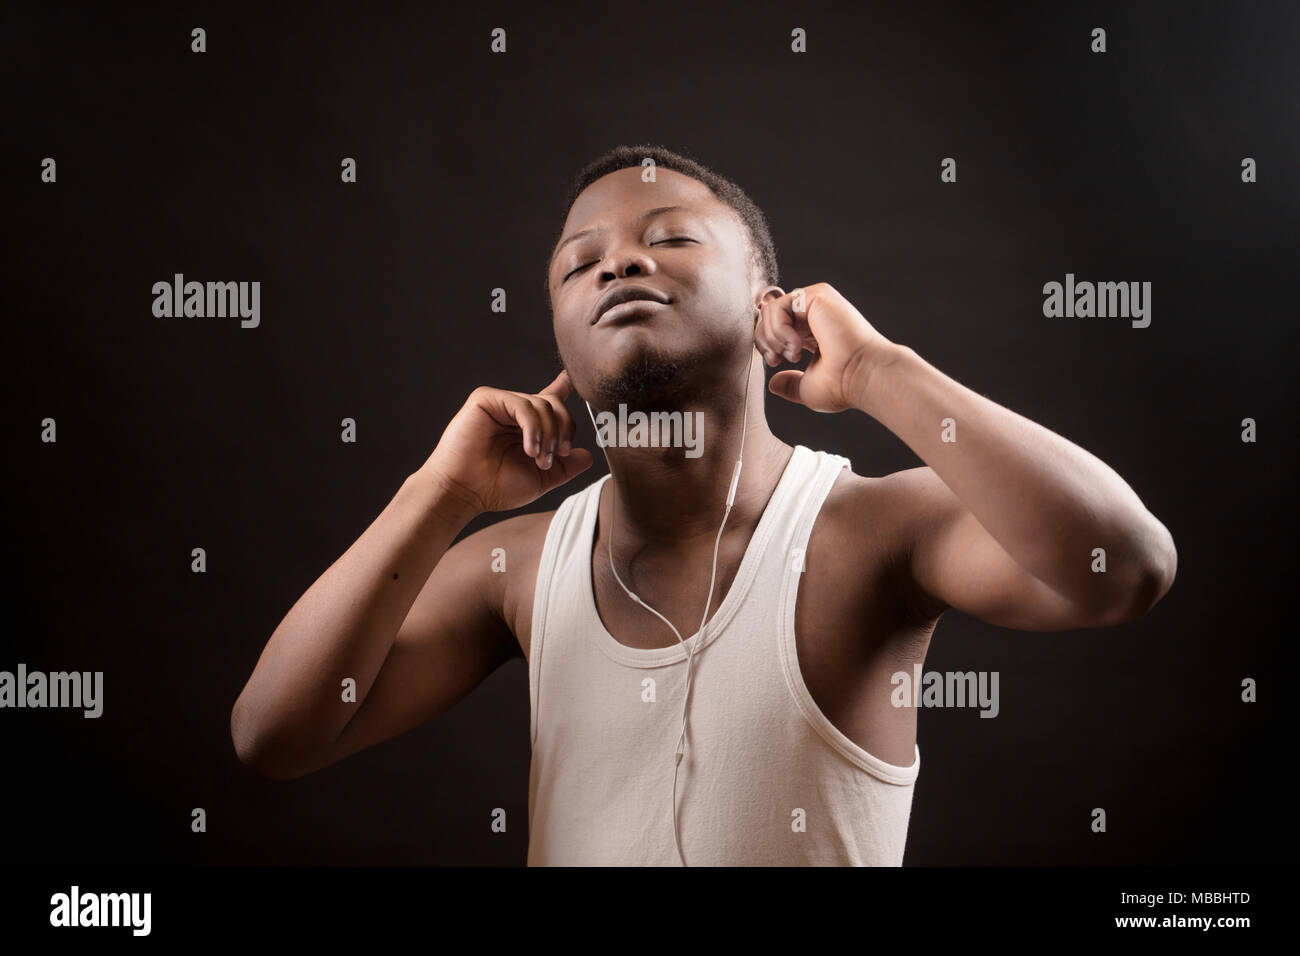 young African male listening to music with closed eyes Stock Photo